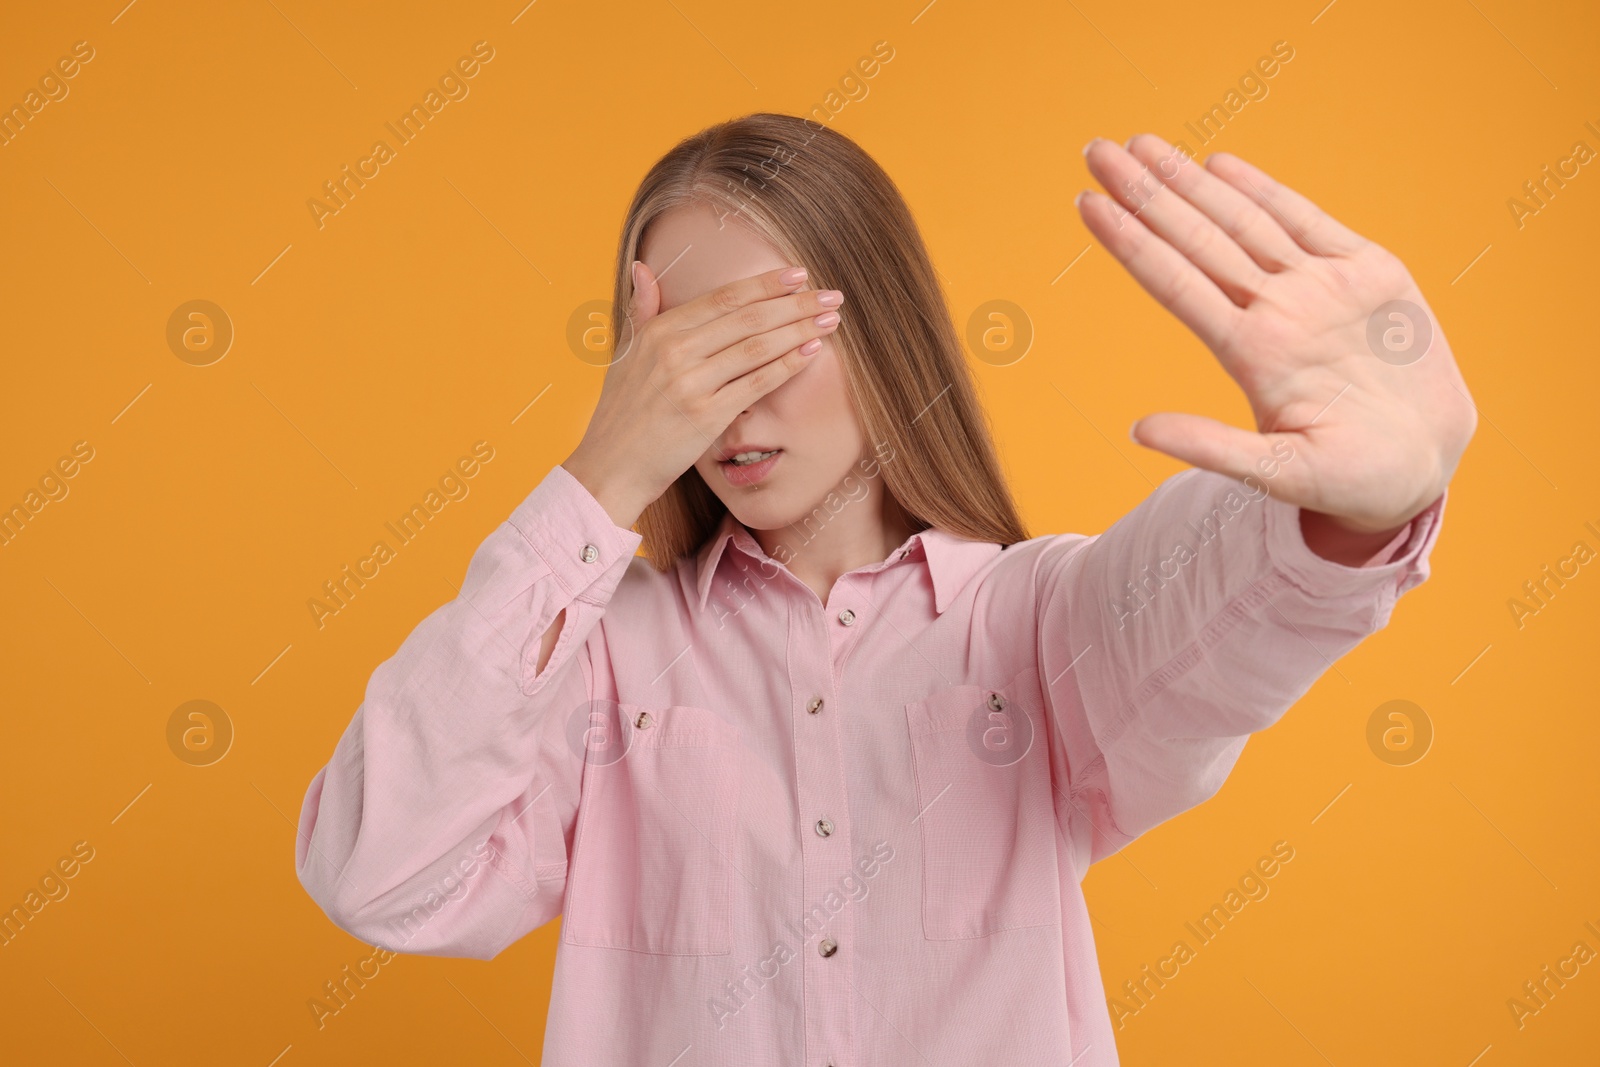 Photo of Embarrassed woman covering face with hand on orange background